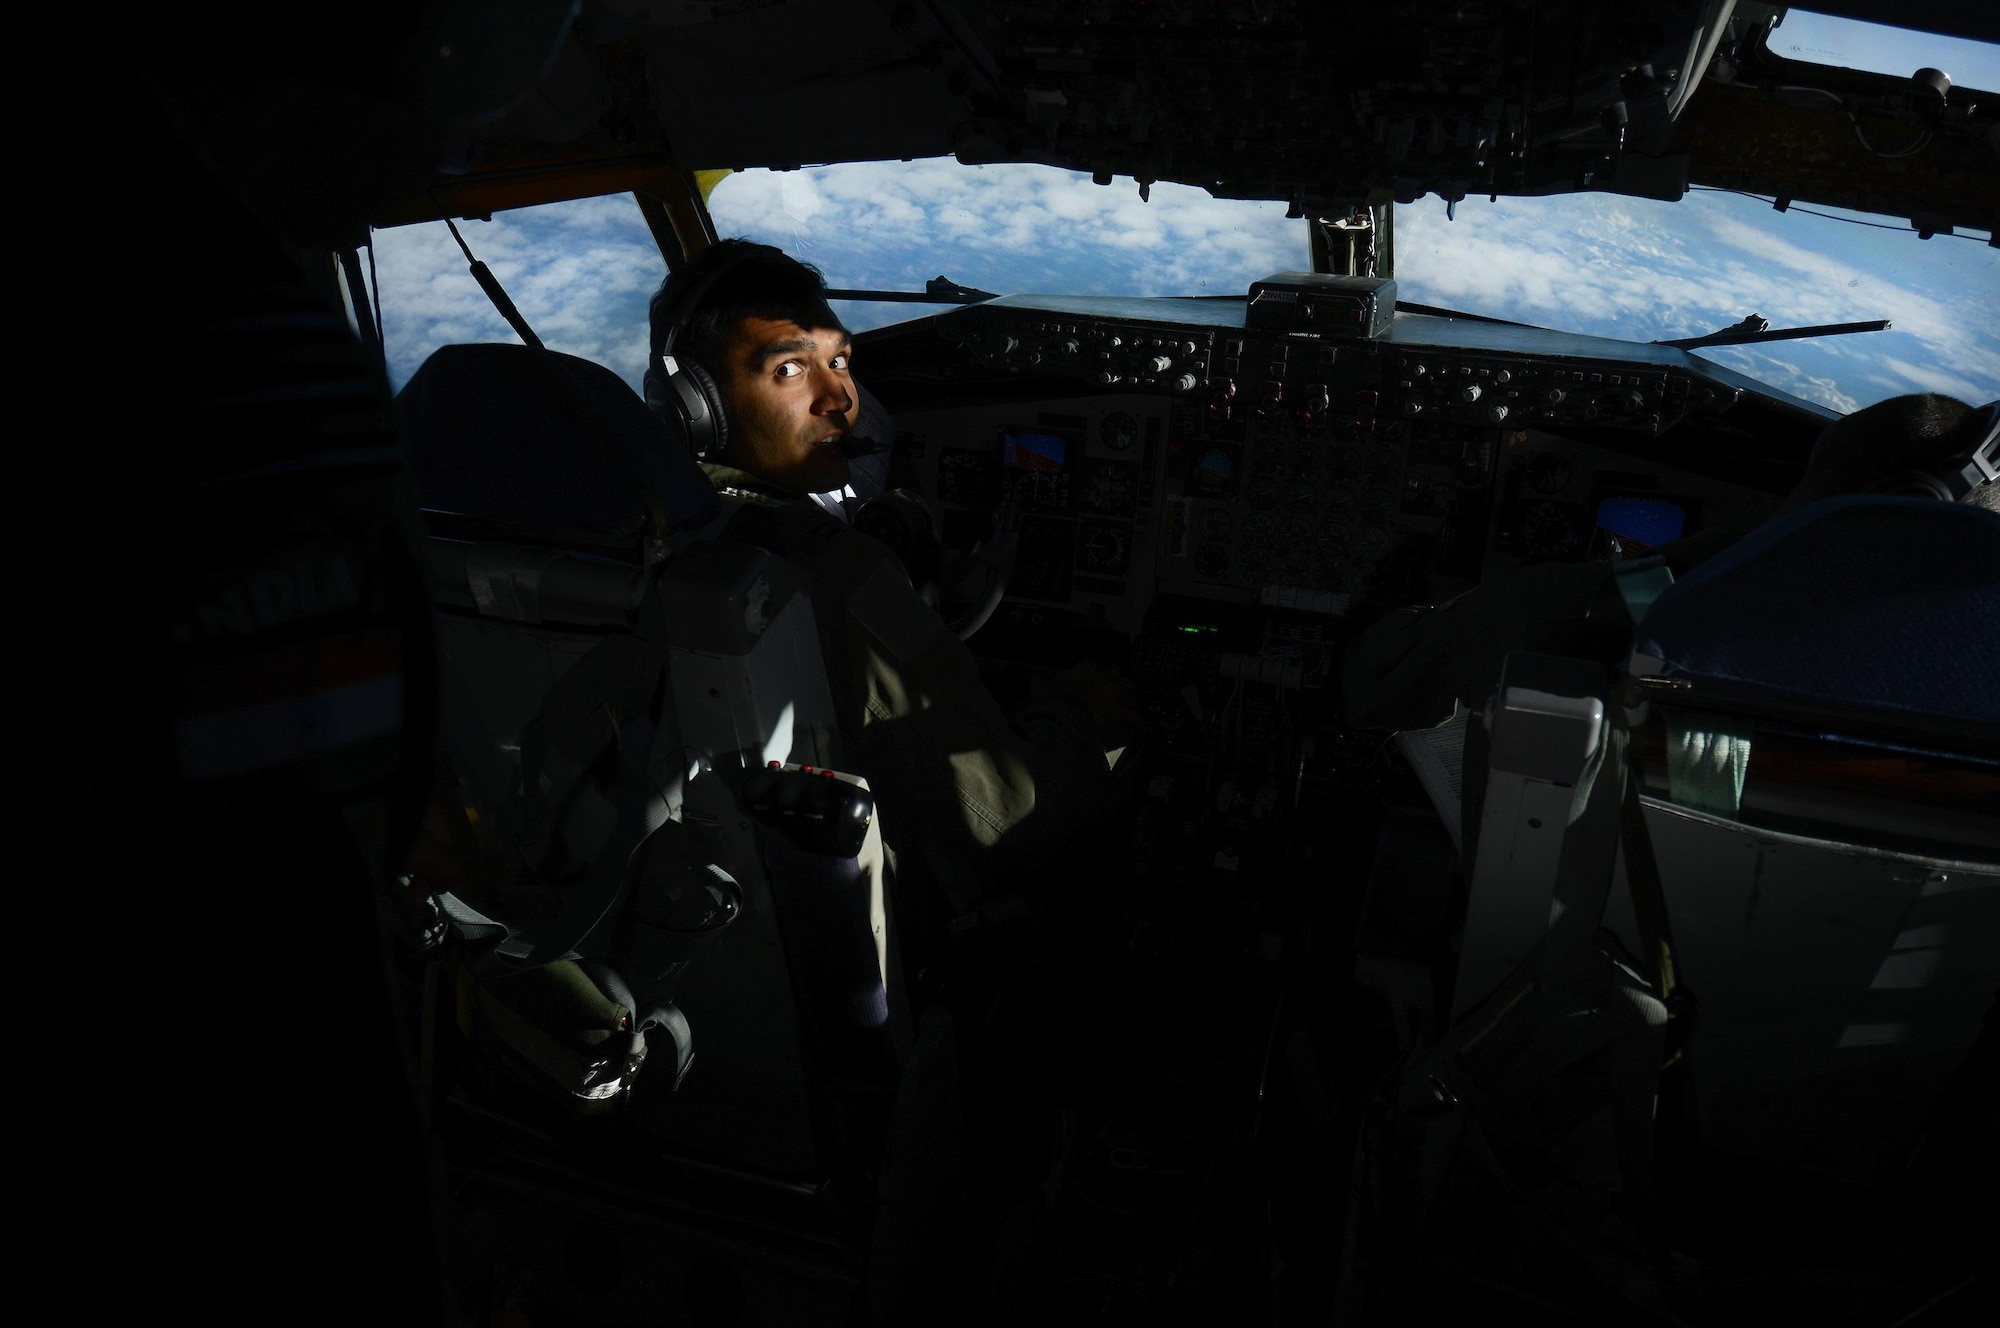 U.S. Air Force Capt. Karan Bansal, a KC-135 Stratotanker pilot assigned to the 909th Air Refueling Squadron, Kadena Air Base, Japan, directs his attention to an Indian Air Force airman, May 12, 2016, over the Joint Pacific Alaska Range Complex. As part of RED FLAG-Alaska 16-1, the 67th Fighter Squadron, 80th FS and the 909th ARS conducted an in-flight refueling exercise to demonstrate how tanker support can extend and prolong flight operations for U.S. and coalition aircraft. (U.S. Air Force photo by Tech. Sgt. Steven R. Doty)